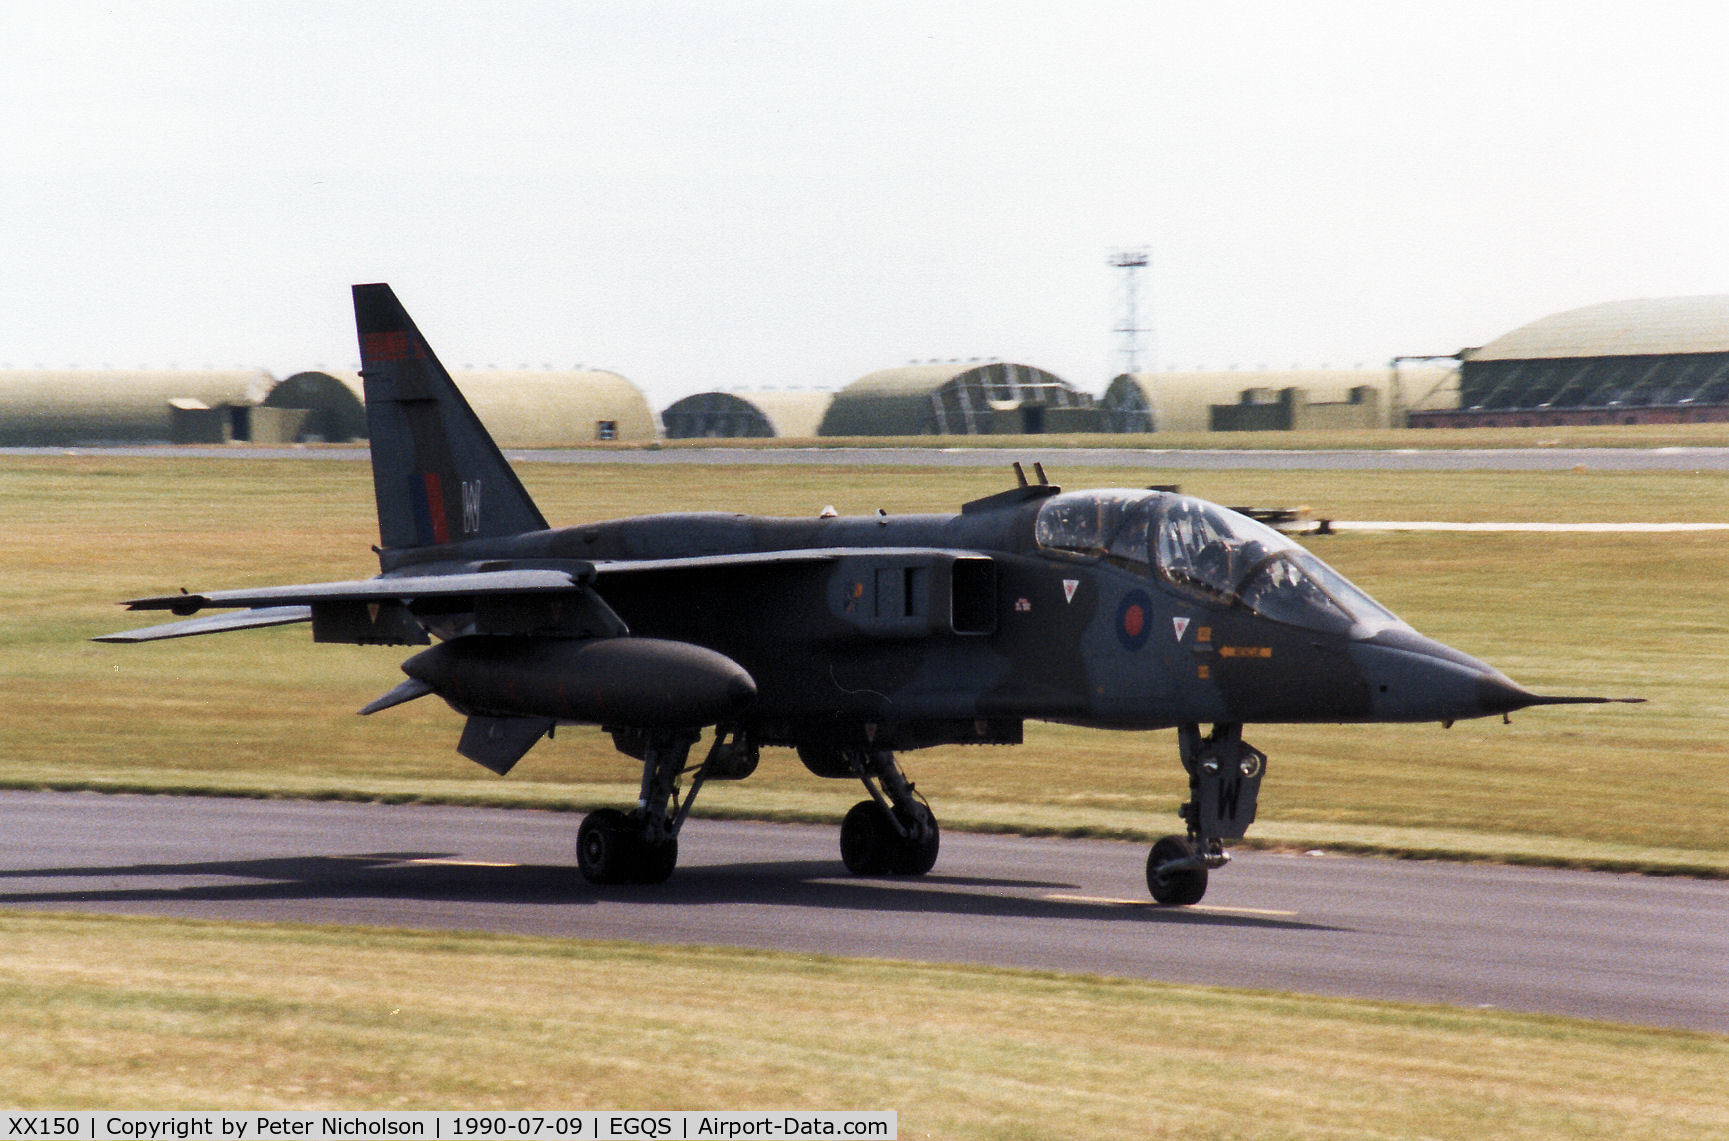 XX150, 1974 Sepecat Jaguar T.2A C/N B.15, Jaguar T.2A of 226 Operational Conversion Unit taxying to the active runway at RAF Lossiemouth in the Summer of 1990.